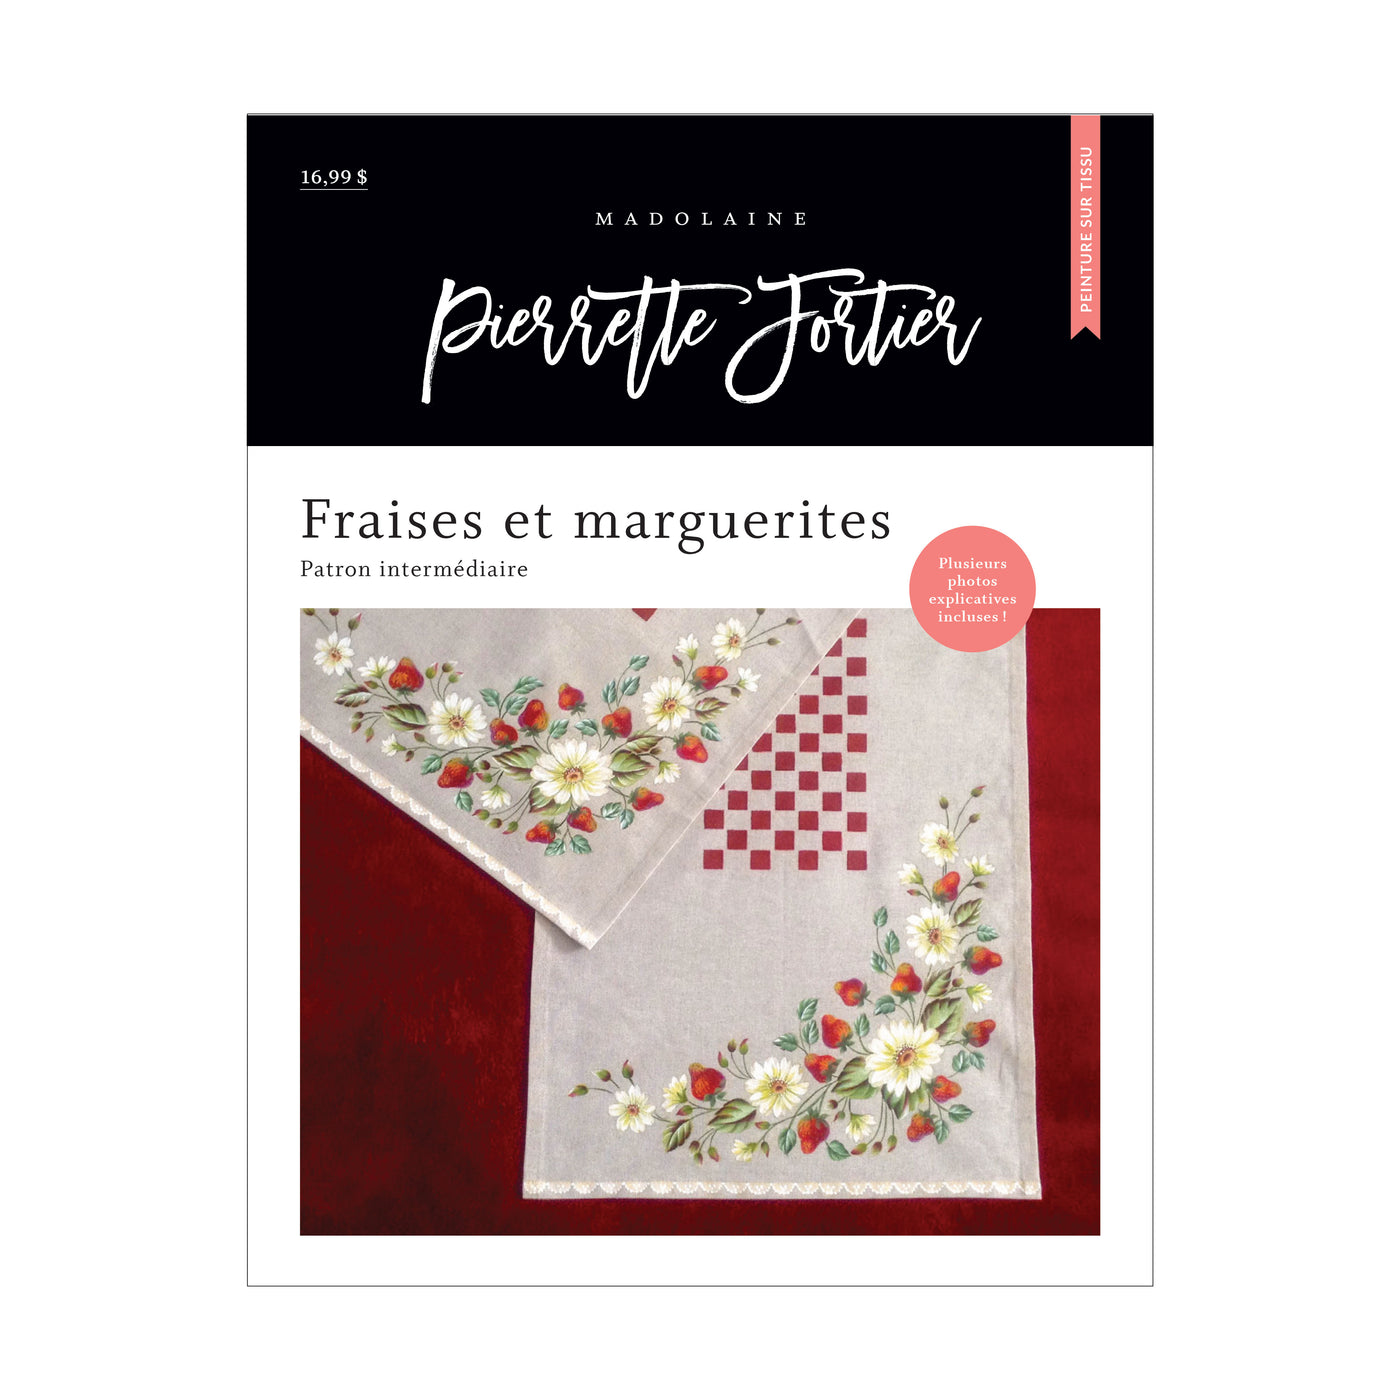 M Painting Pattern - “Strawberries and daisies” by Pierrette Fortier (Printed version)